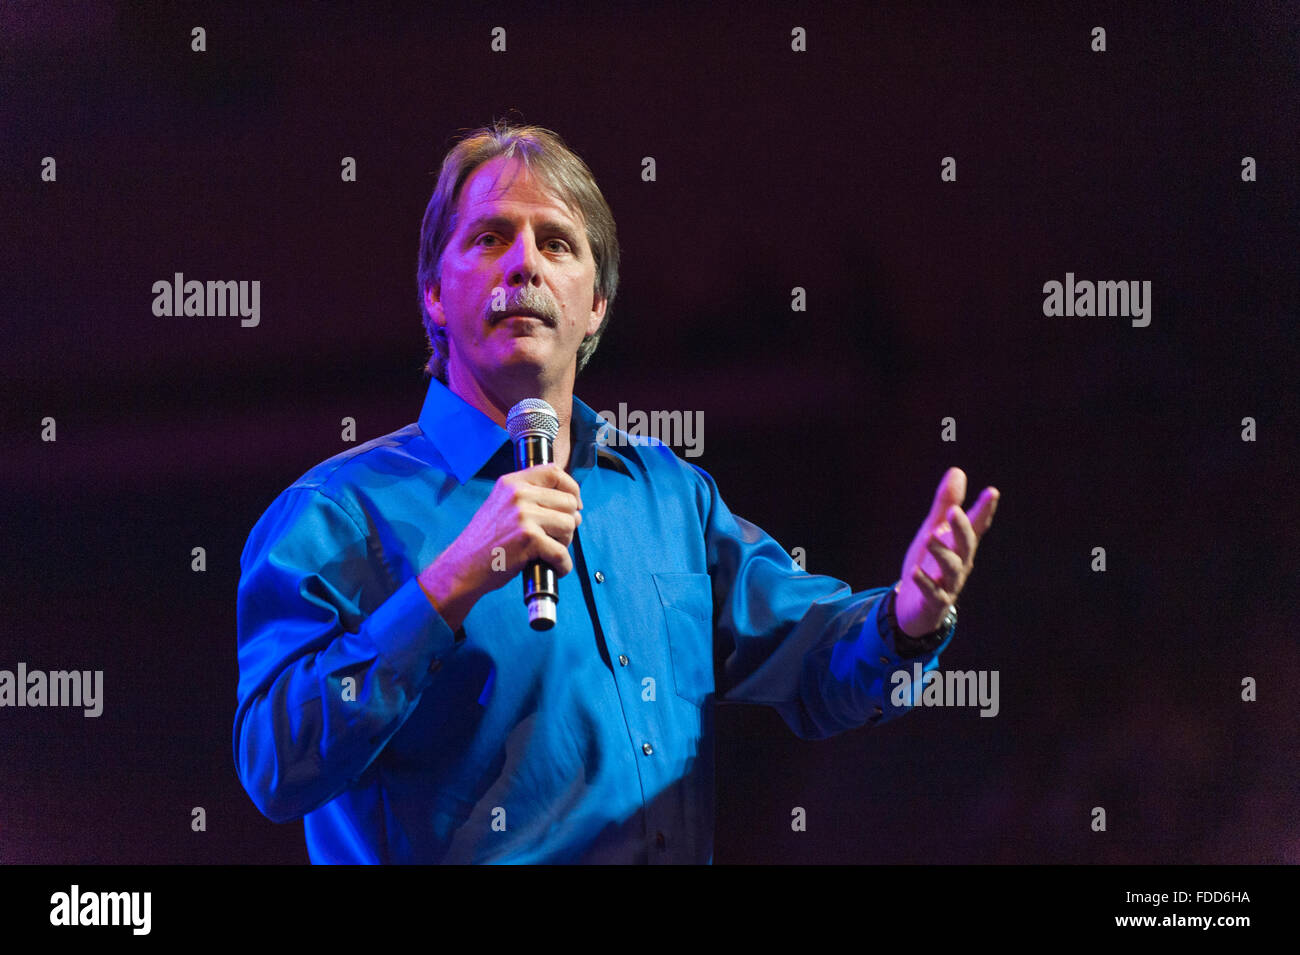 American television personality and blue collar comedian Jeff Foxworthy on stage. Stock Photo